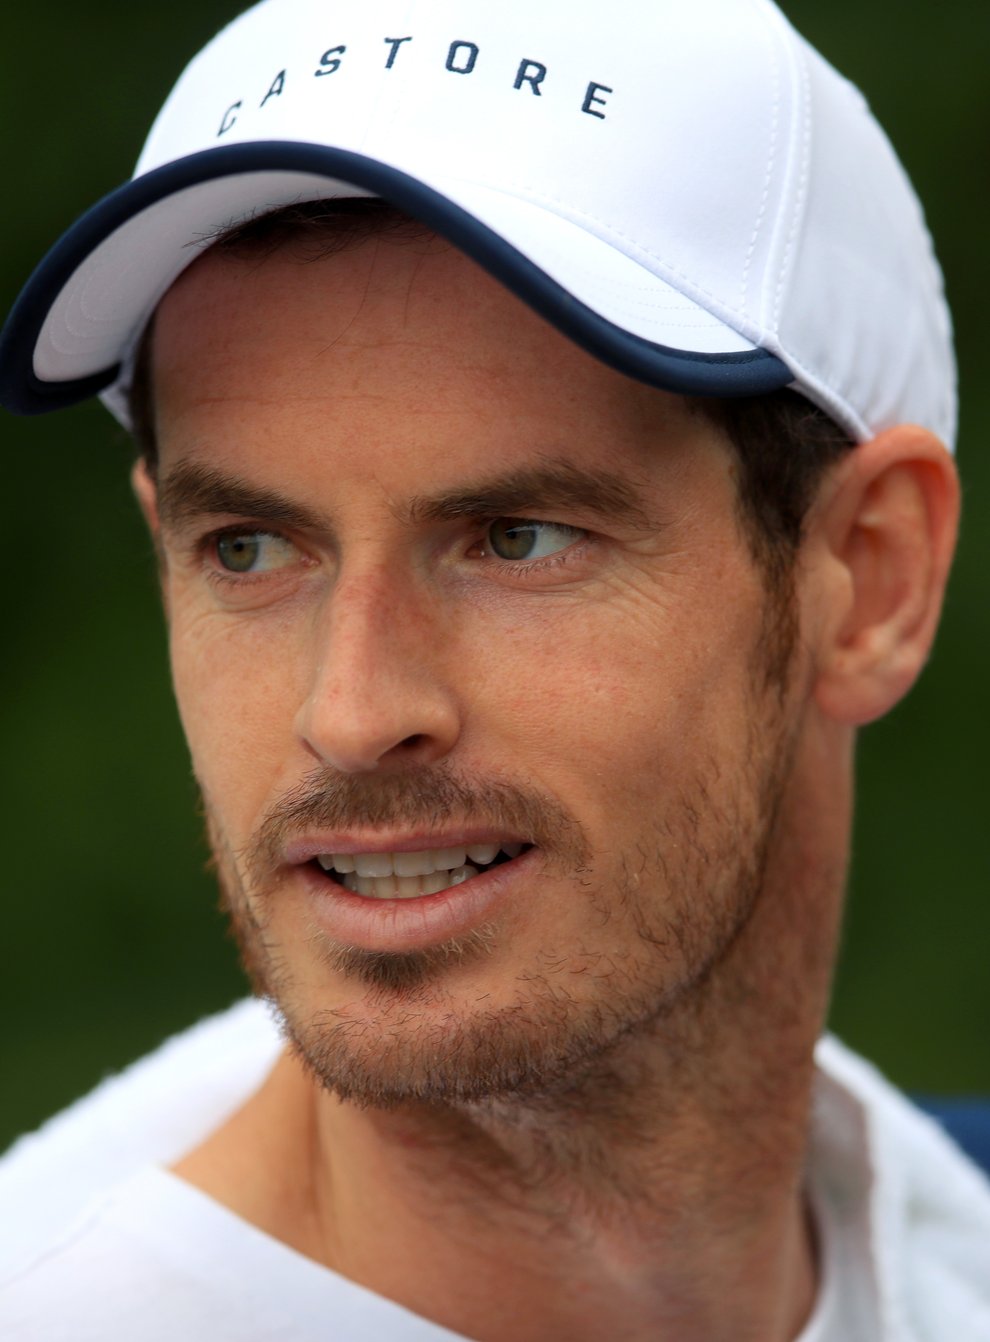 Andy Murray would consider a career in golf after finishing his tennis career